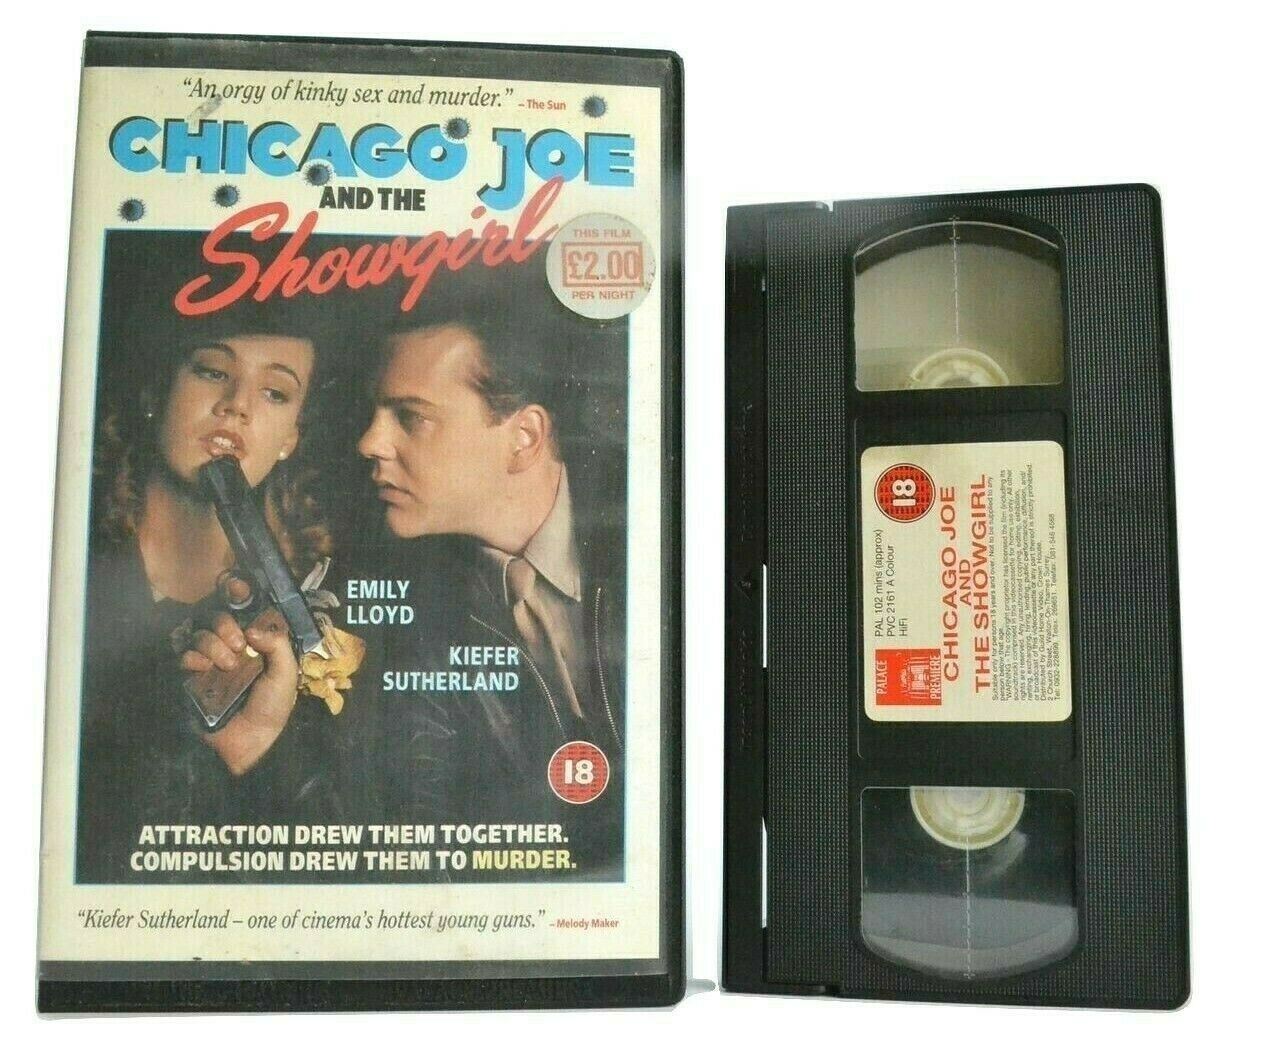 Chicago Joe And The Showgirl (1990): True Story Drama - Kiefer Sutherland - VHS - Golden Class Movies LTD